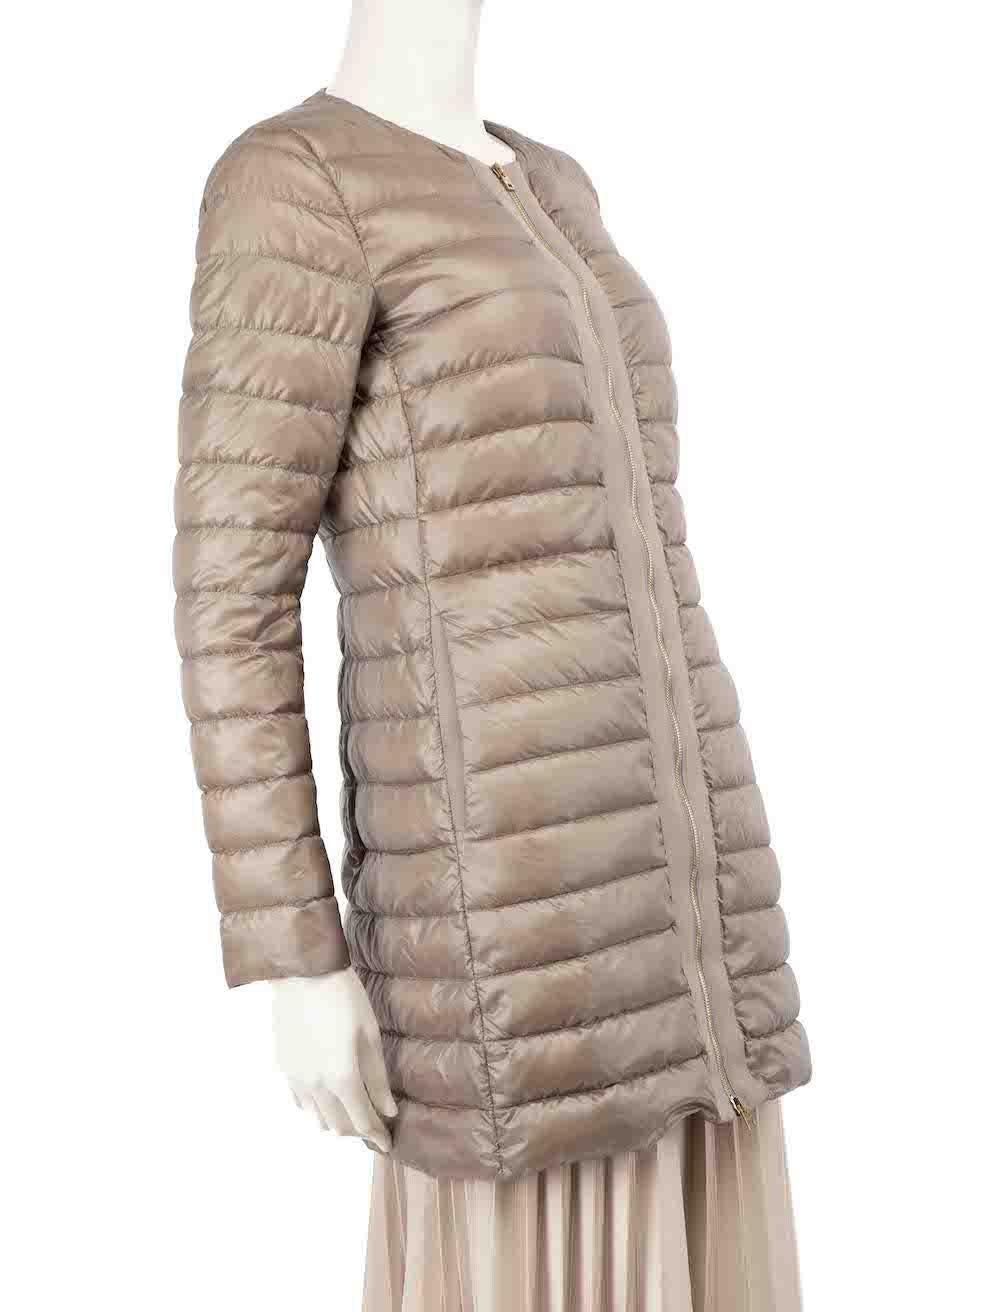 CONDITION is Very good. Minimal wear to jacket is evident. Minimal pull thread to weave on the front left side of this used Herno designer resale item.
 
 
 
 Details
 
 
 Taupe
 
 Synthetic
 
 Puffer jacket
 
 Quilted
 
 Zip fastening
 
 Round